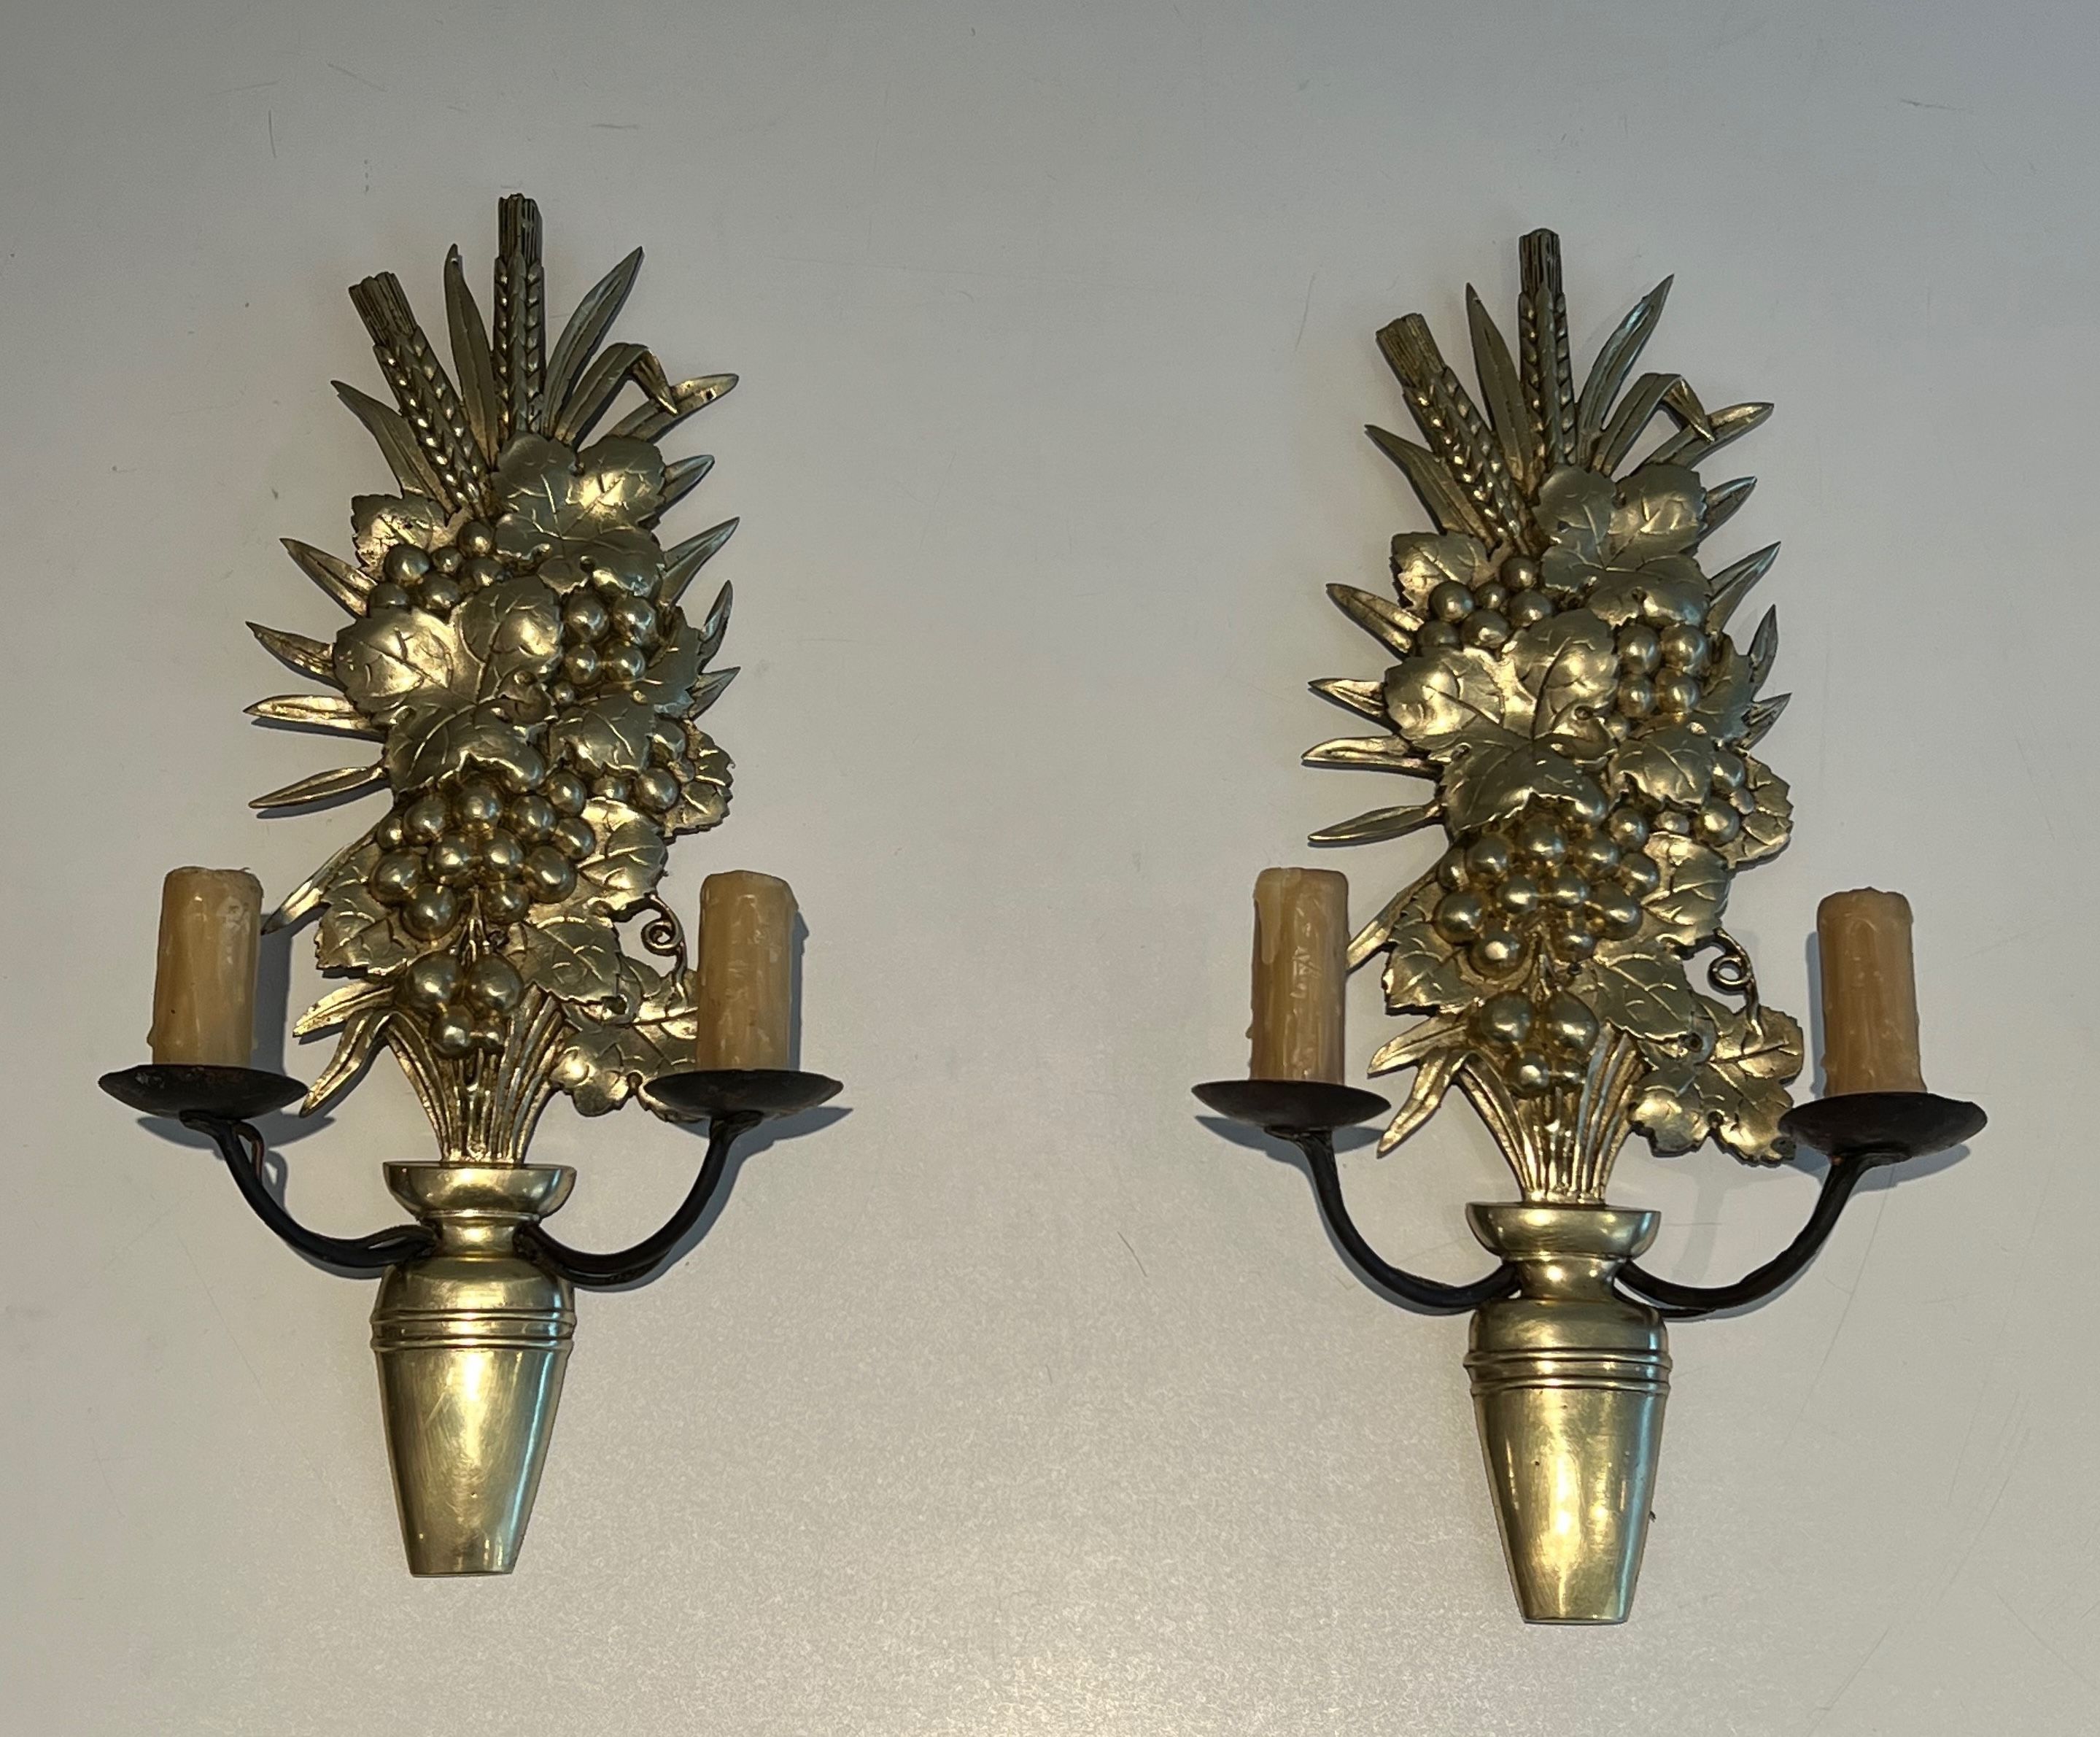 Pair of Bronze and Wrought Iron Wall Lights Representing a fruit Bowl